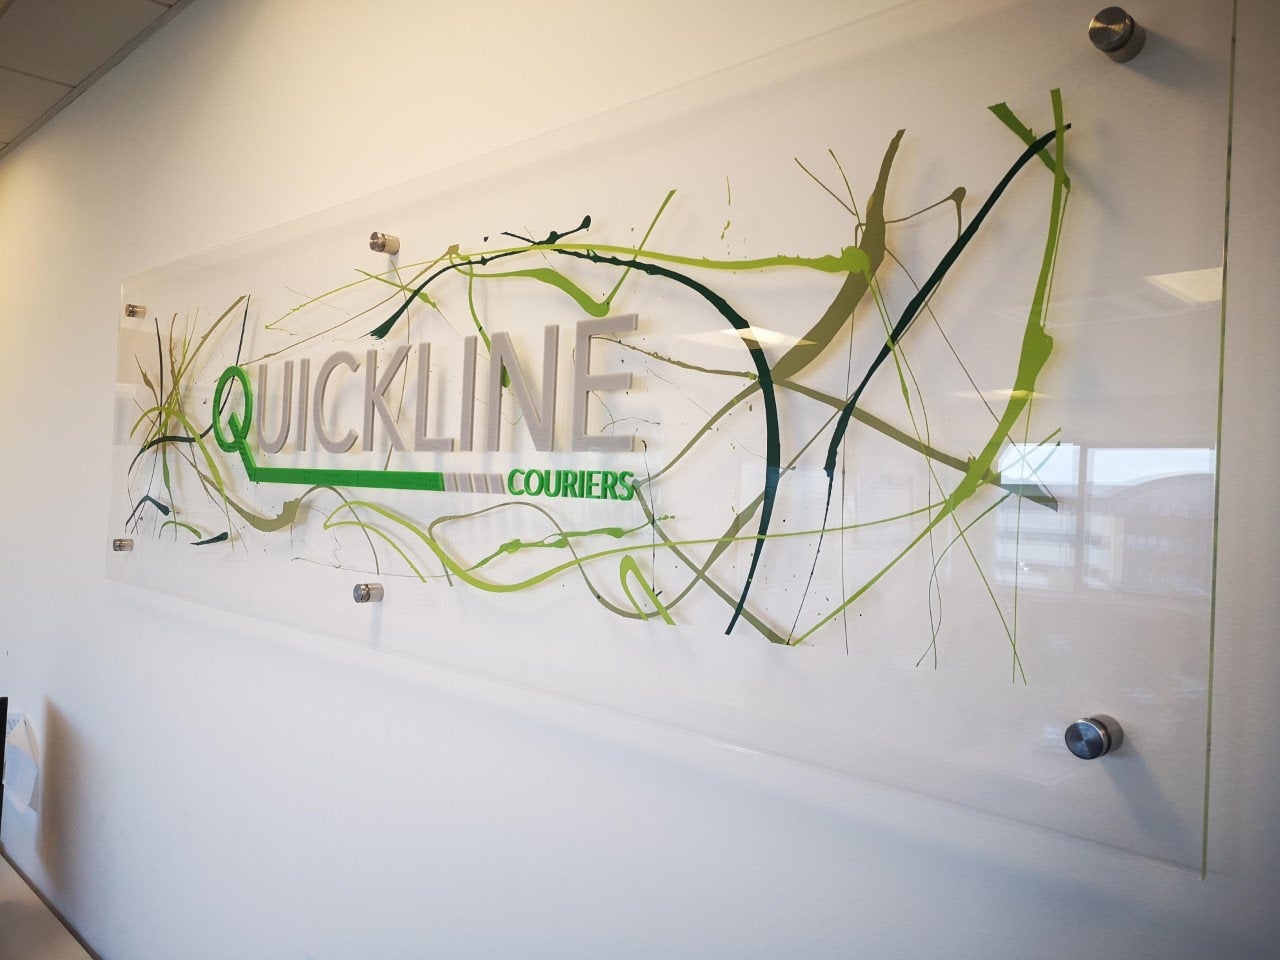 Corporate office artwork (Customise with company logo and colours)